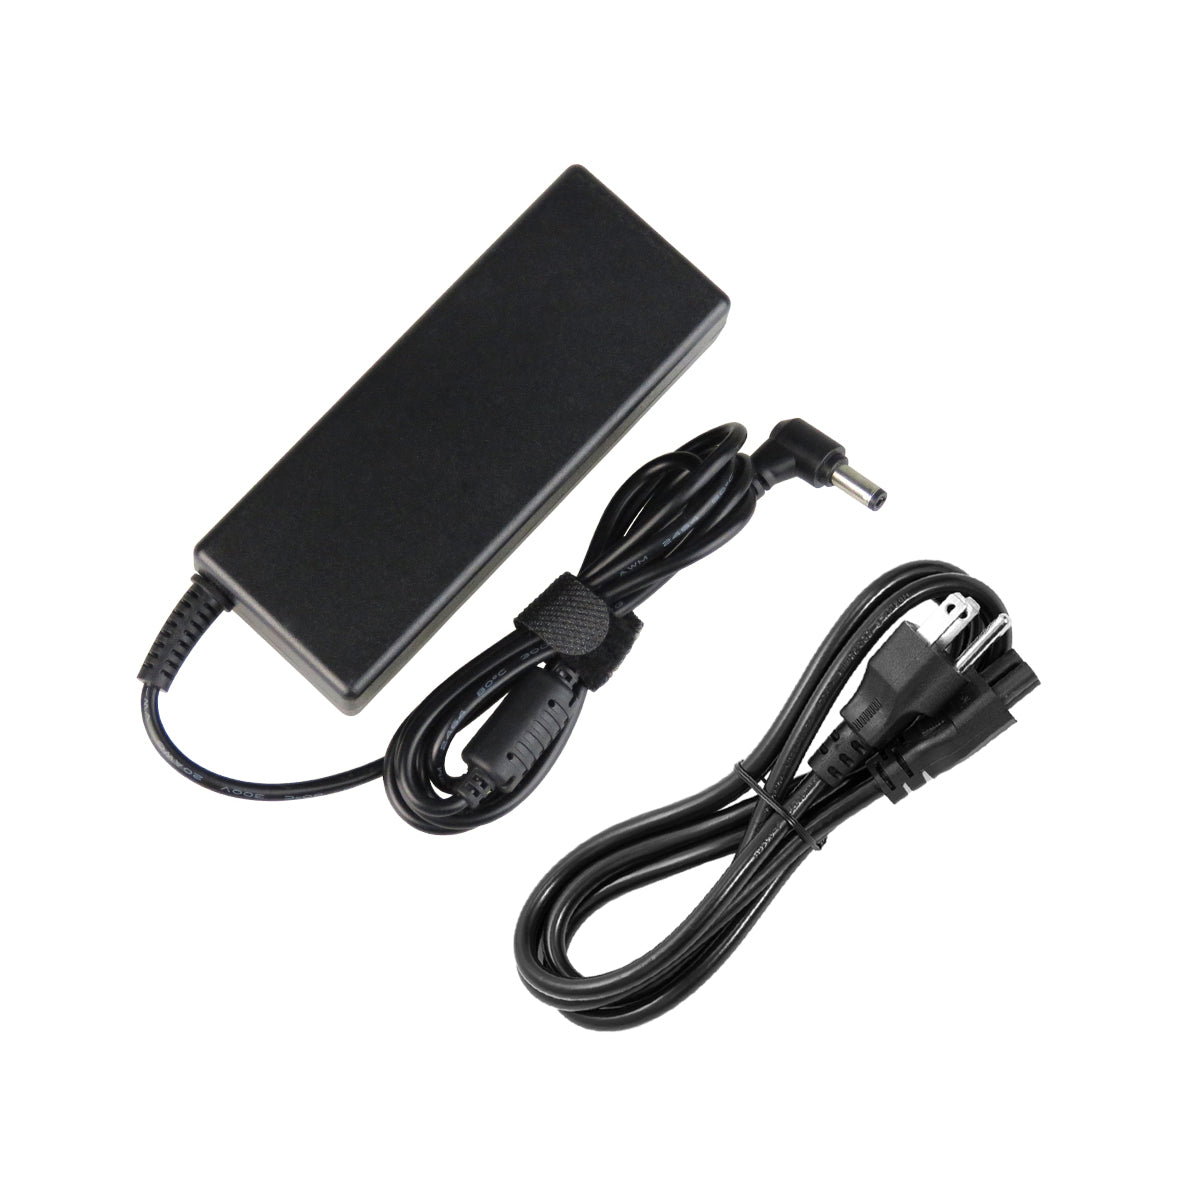 AC Adapter Charger for Toshiba Satellite c55-a5285 Notebook.